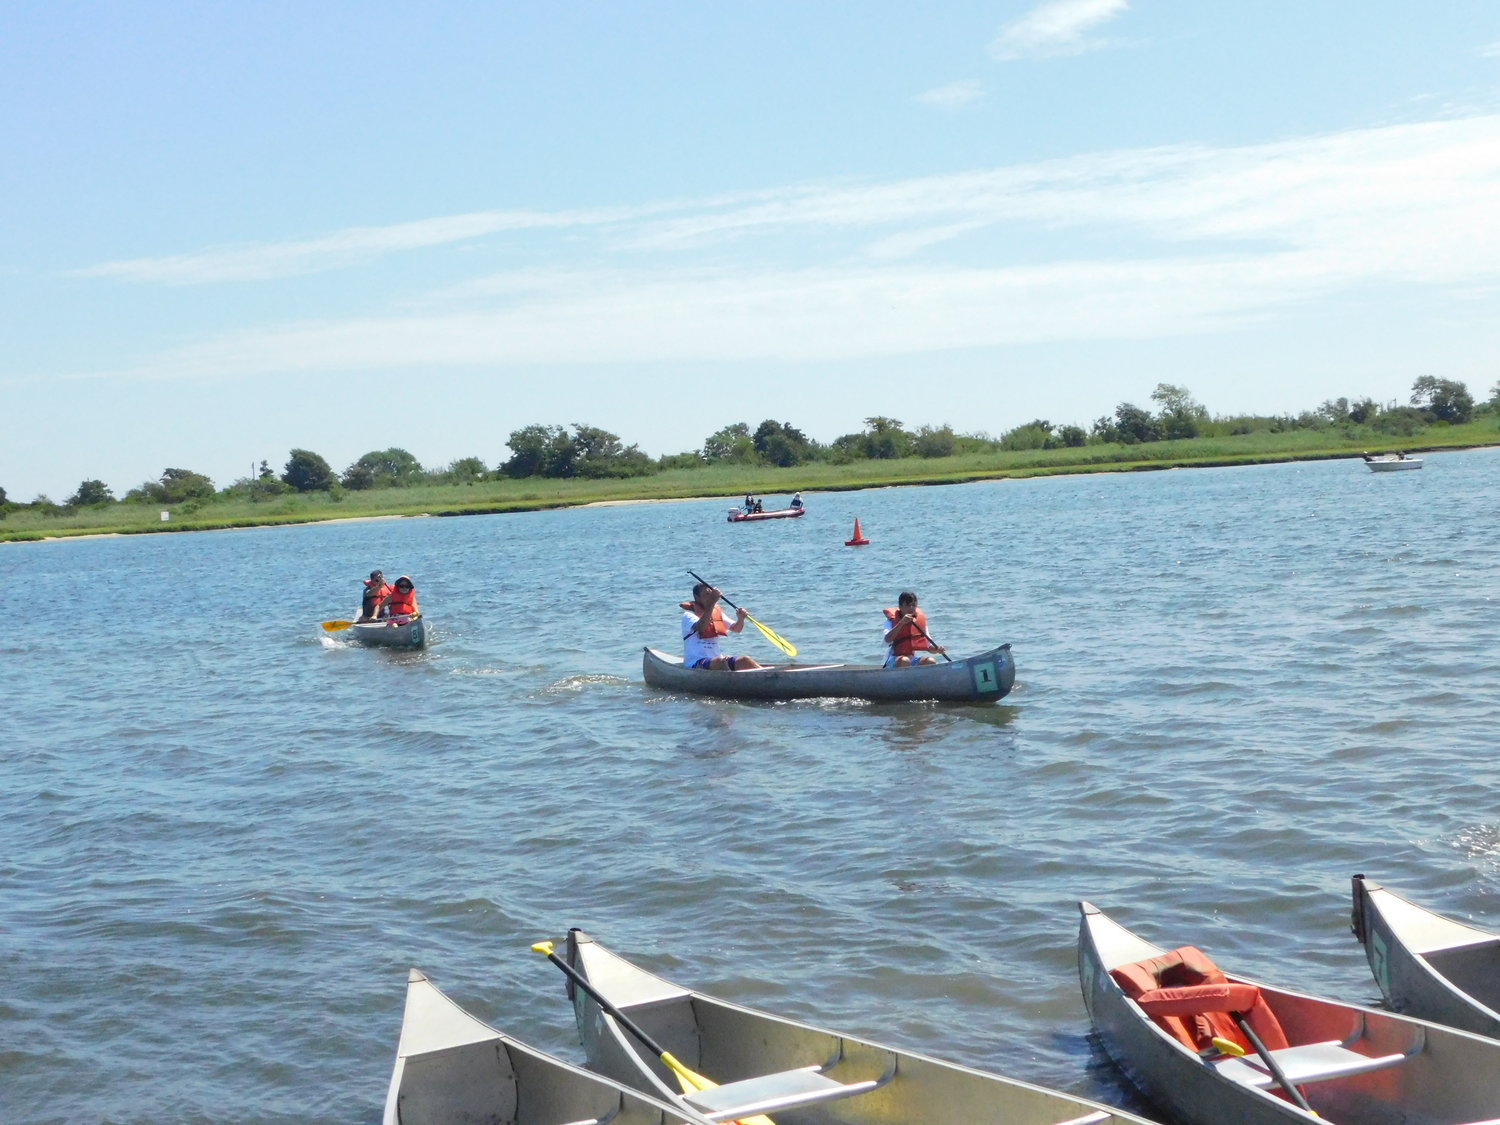 Paddlers carved through the waters off the beach at Cow Meadow Park in pursuit of medals.